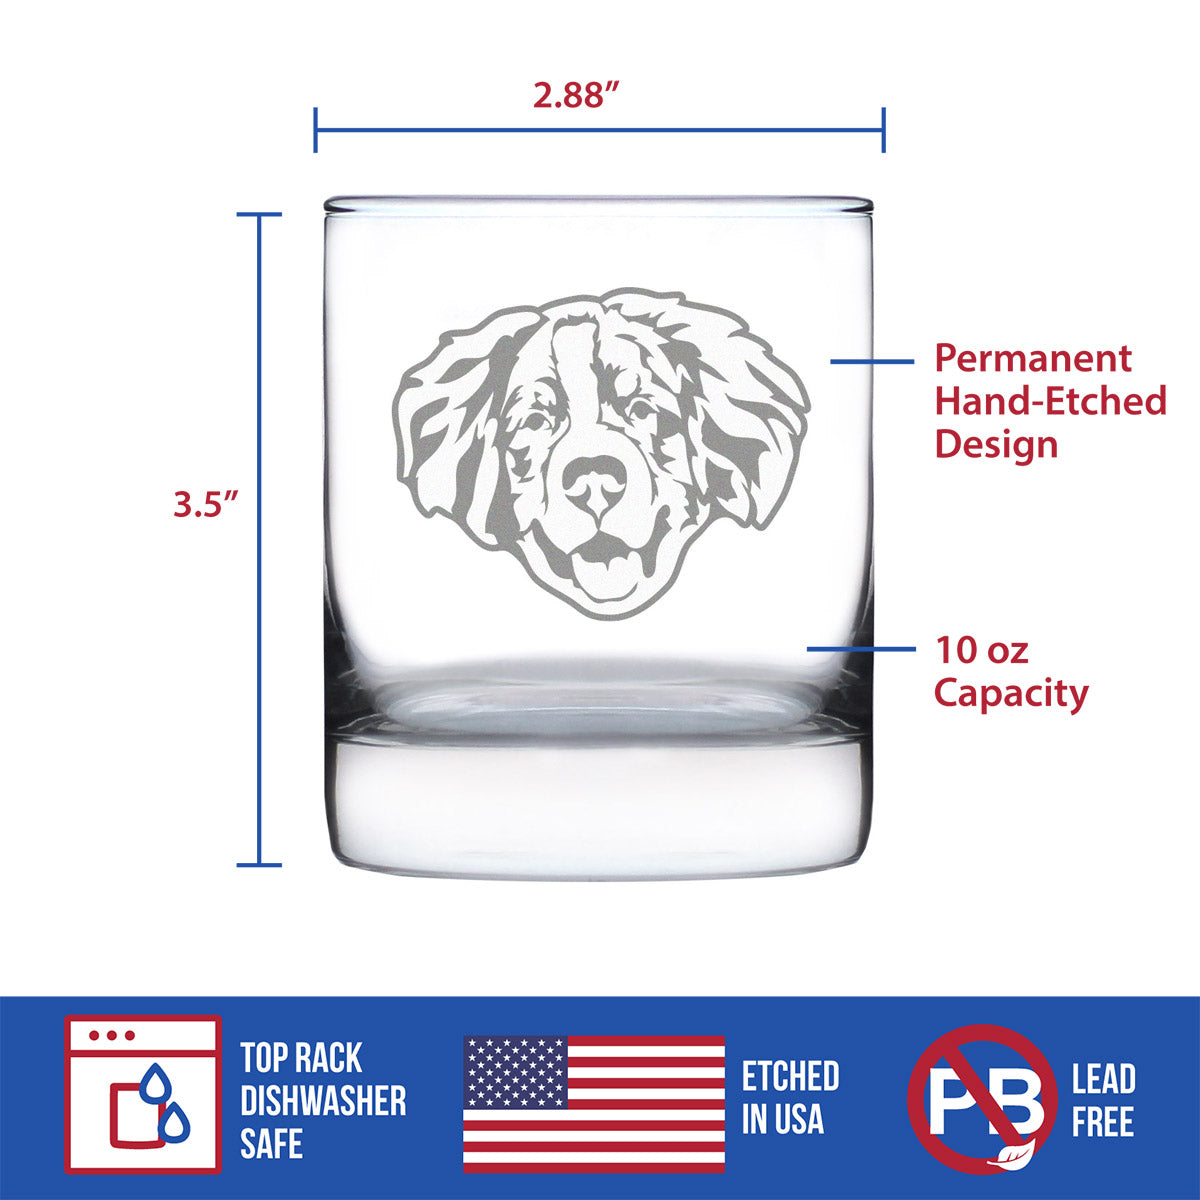 Bernese Mountain Dog Face Whiskey Rocks Glass - Unique Dog Themed Decor and Gifts for Moms &amp; Dads of Berneses - 10.25 Oz